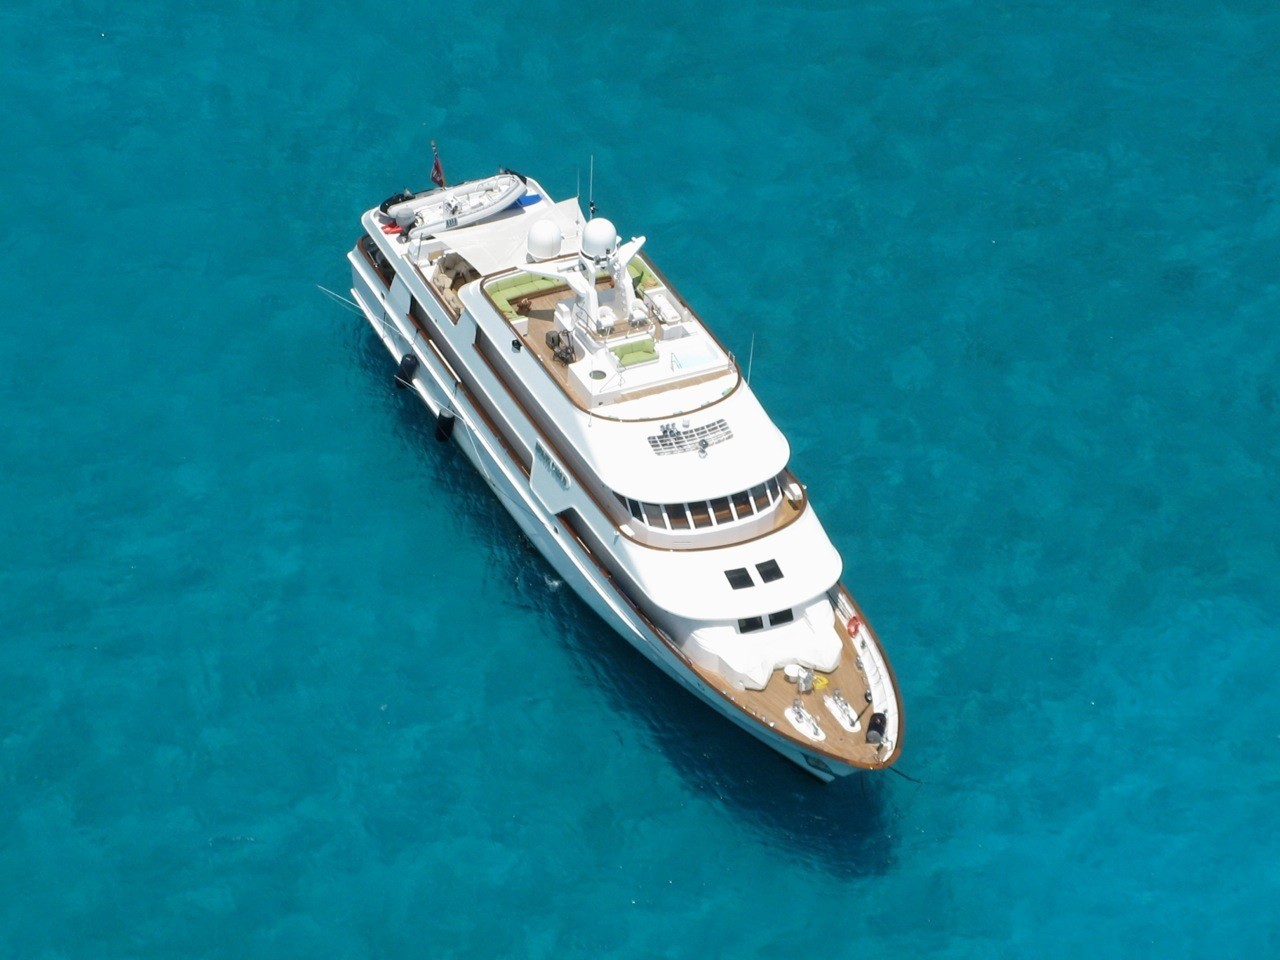 The 40m Yacht MONTE CARLO